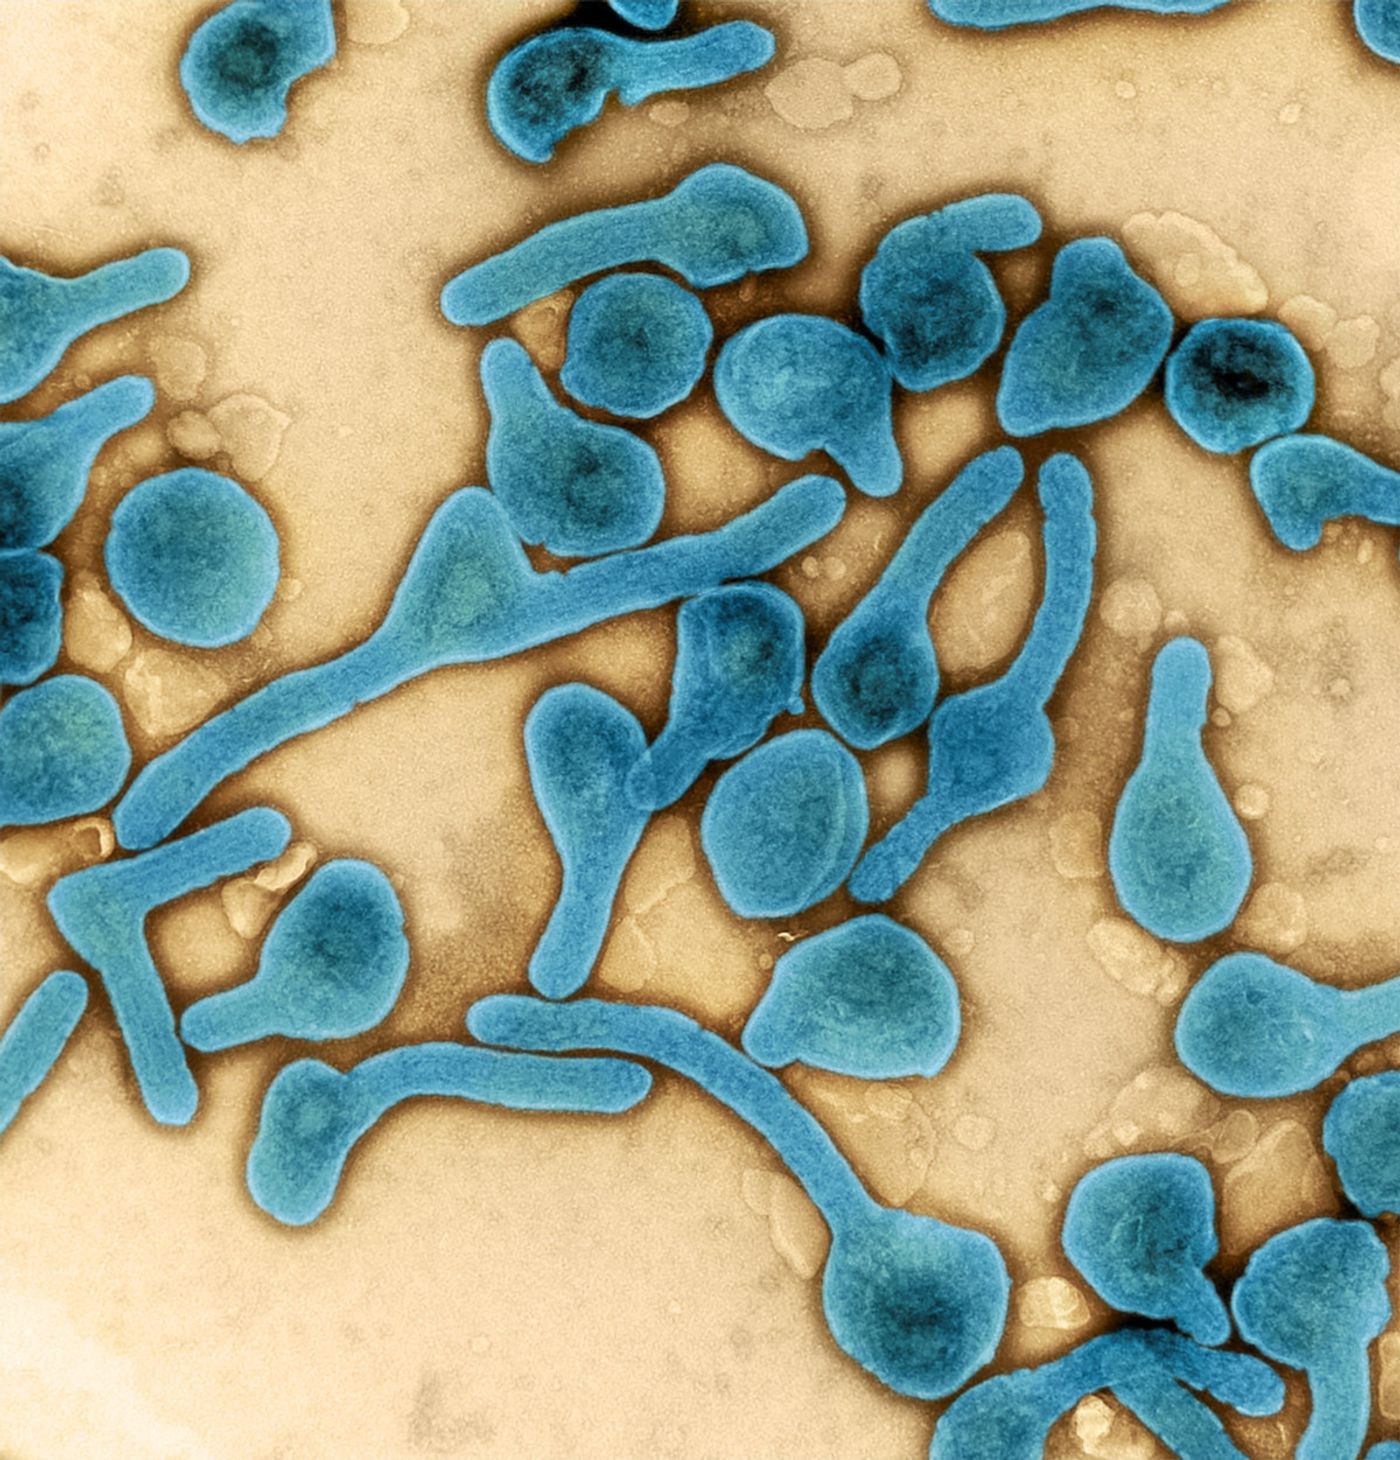 Colorized transmission electron micrograph of Marburg virus particles (blue) harvested from infected VERO E6 cell supernatant. Image captured and color-enhanced at the NIAID Integrated Research Facility in Fort Detrick, Maryland. Credit: NIAID